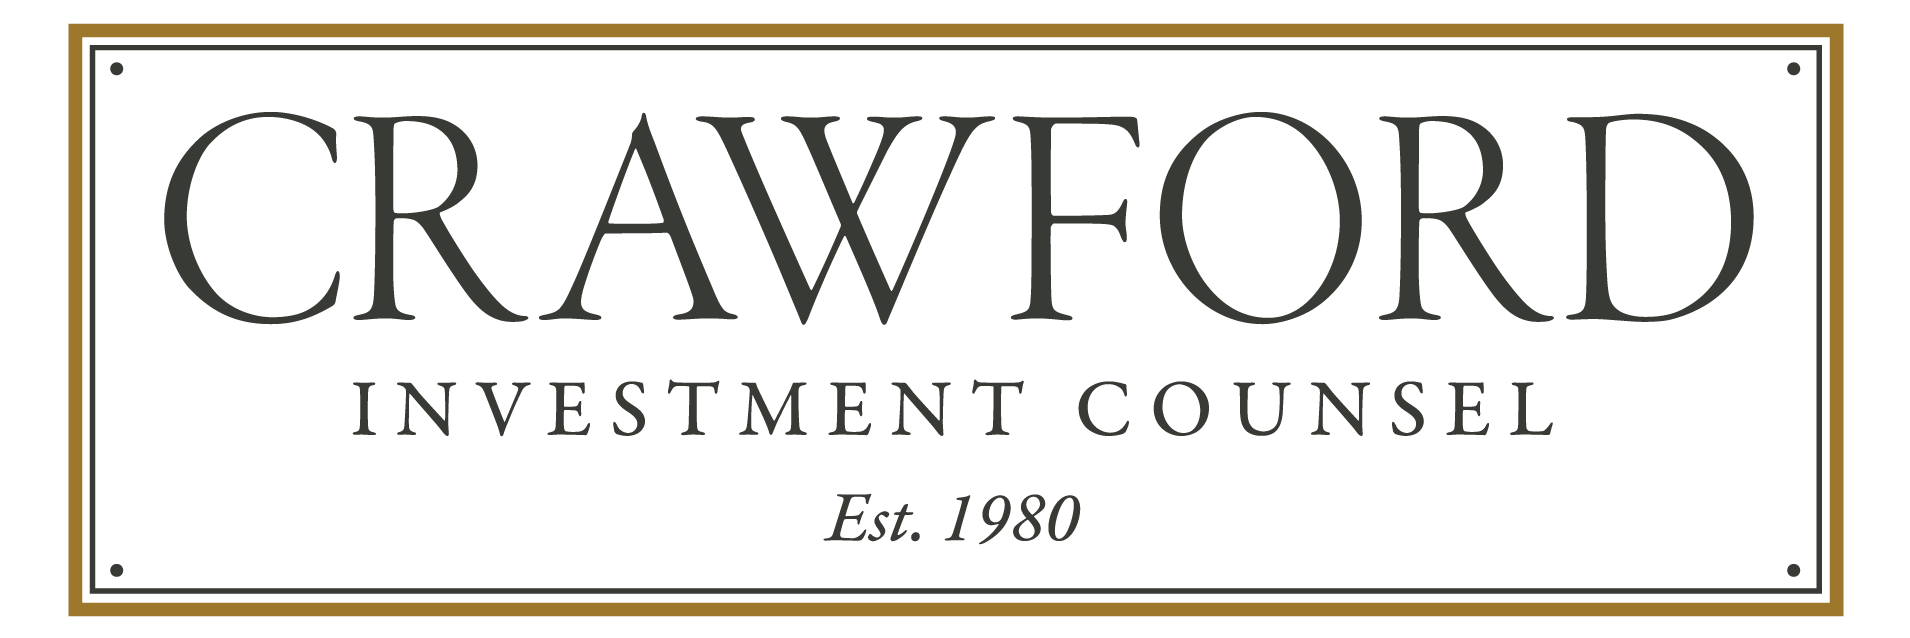 Crawford Investment Counsel